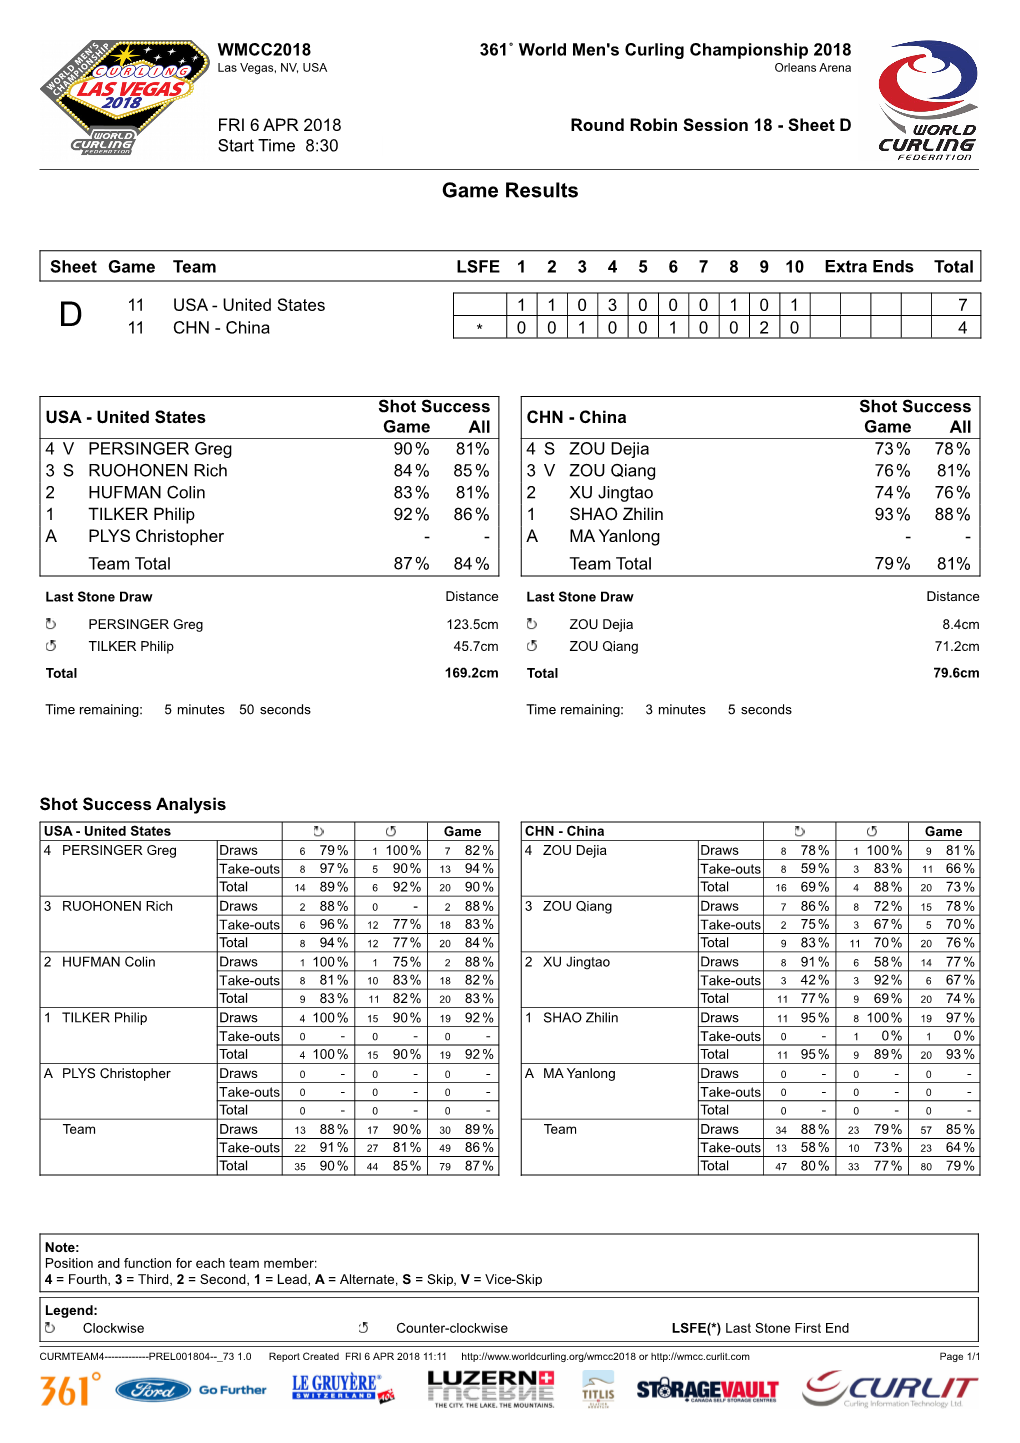 Game Results USA-CHN